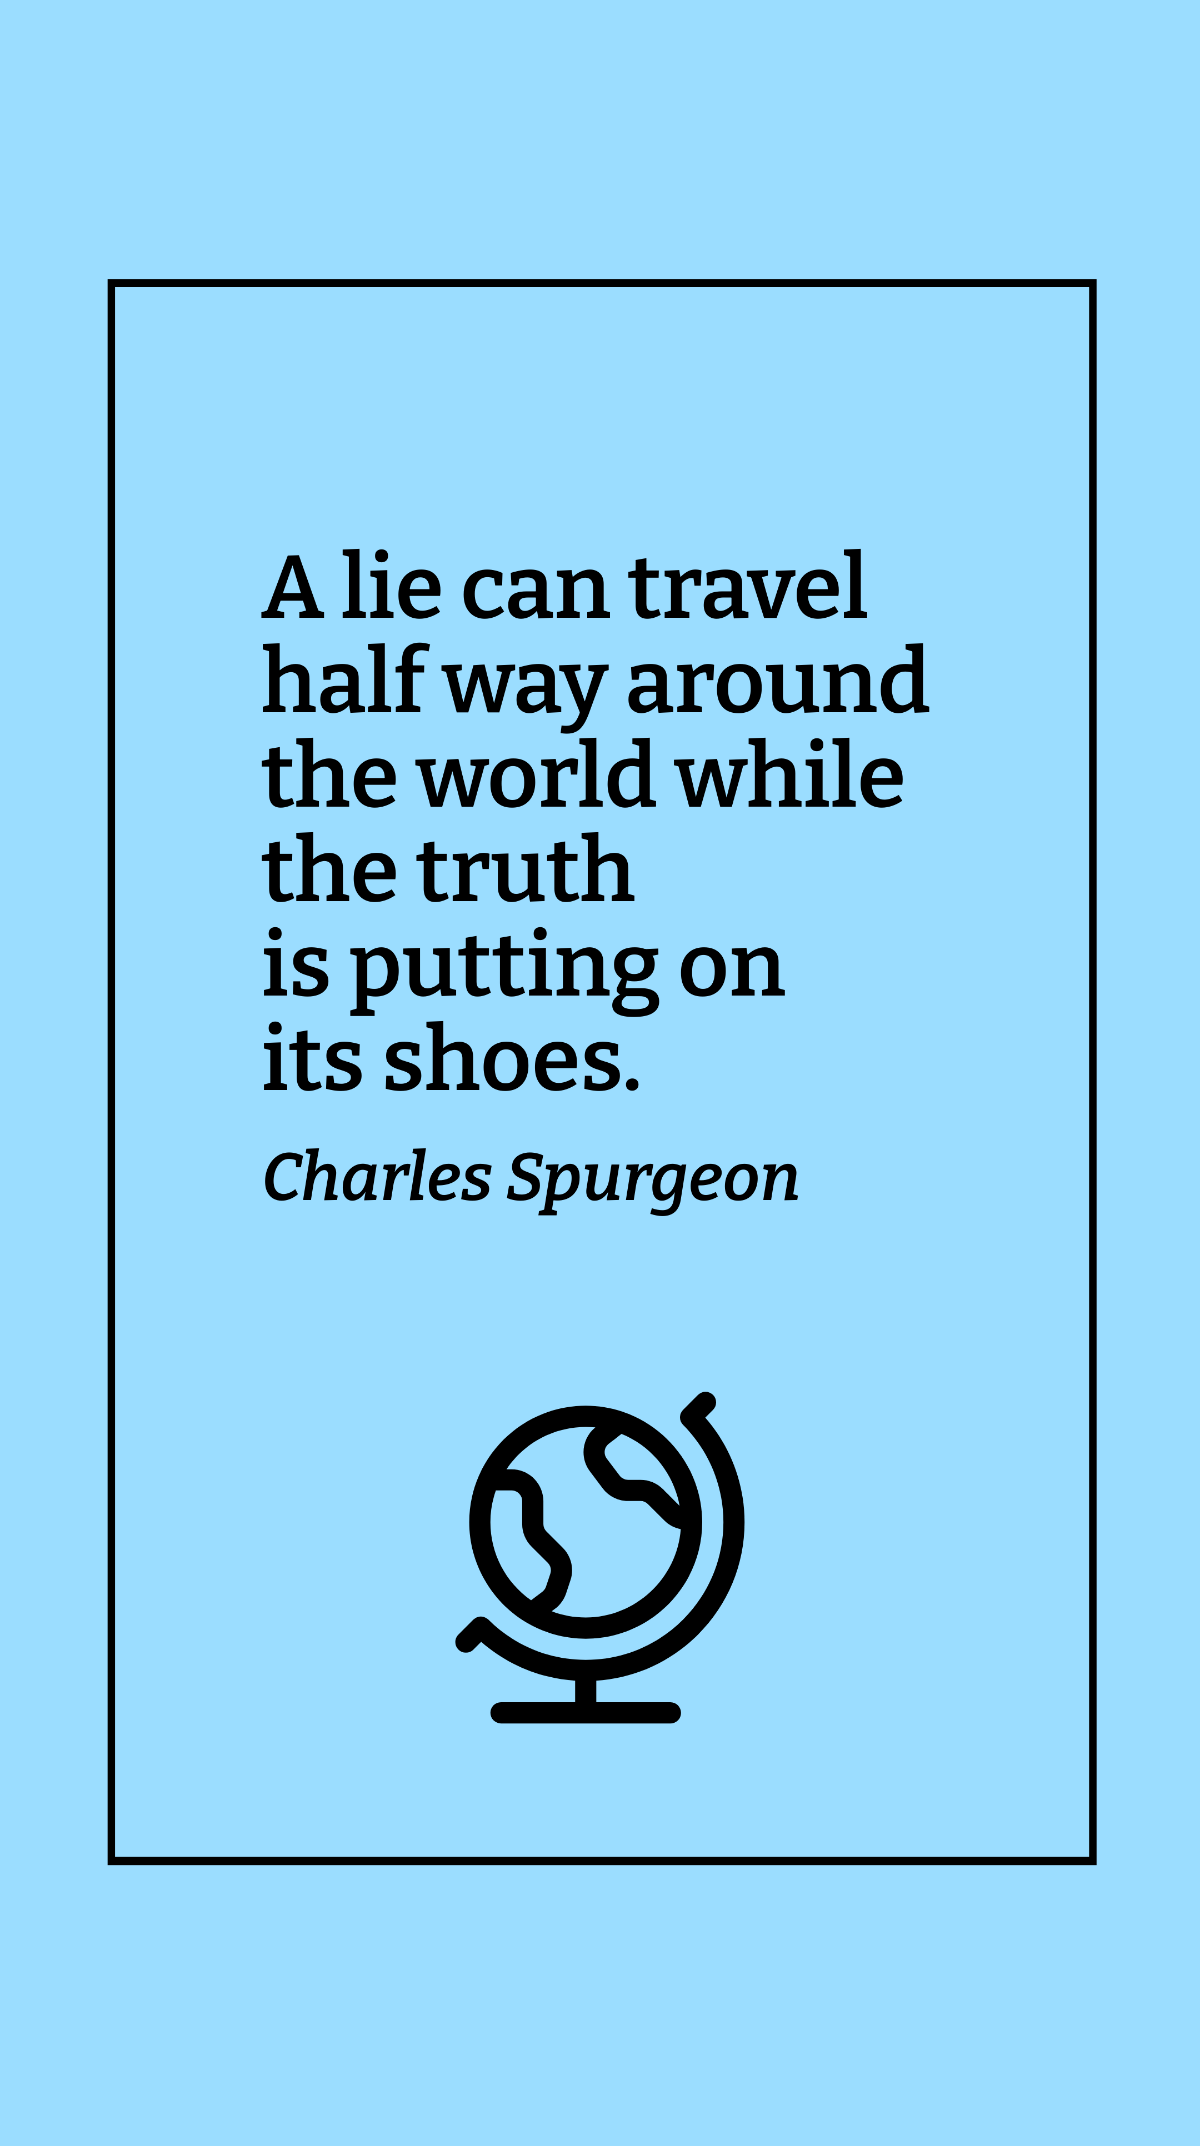 Charles Spurgeon - A lie can travel half way around the world while the truth is putting on its shoes. Template